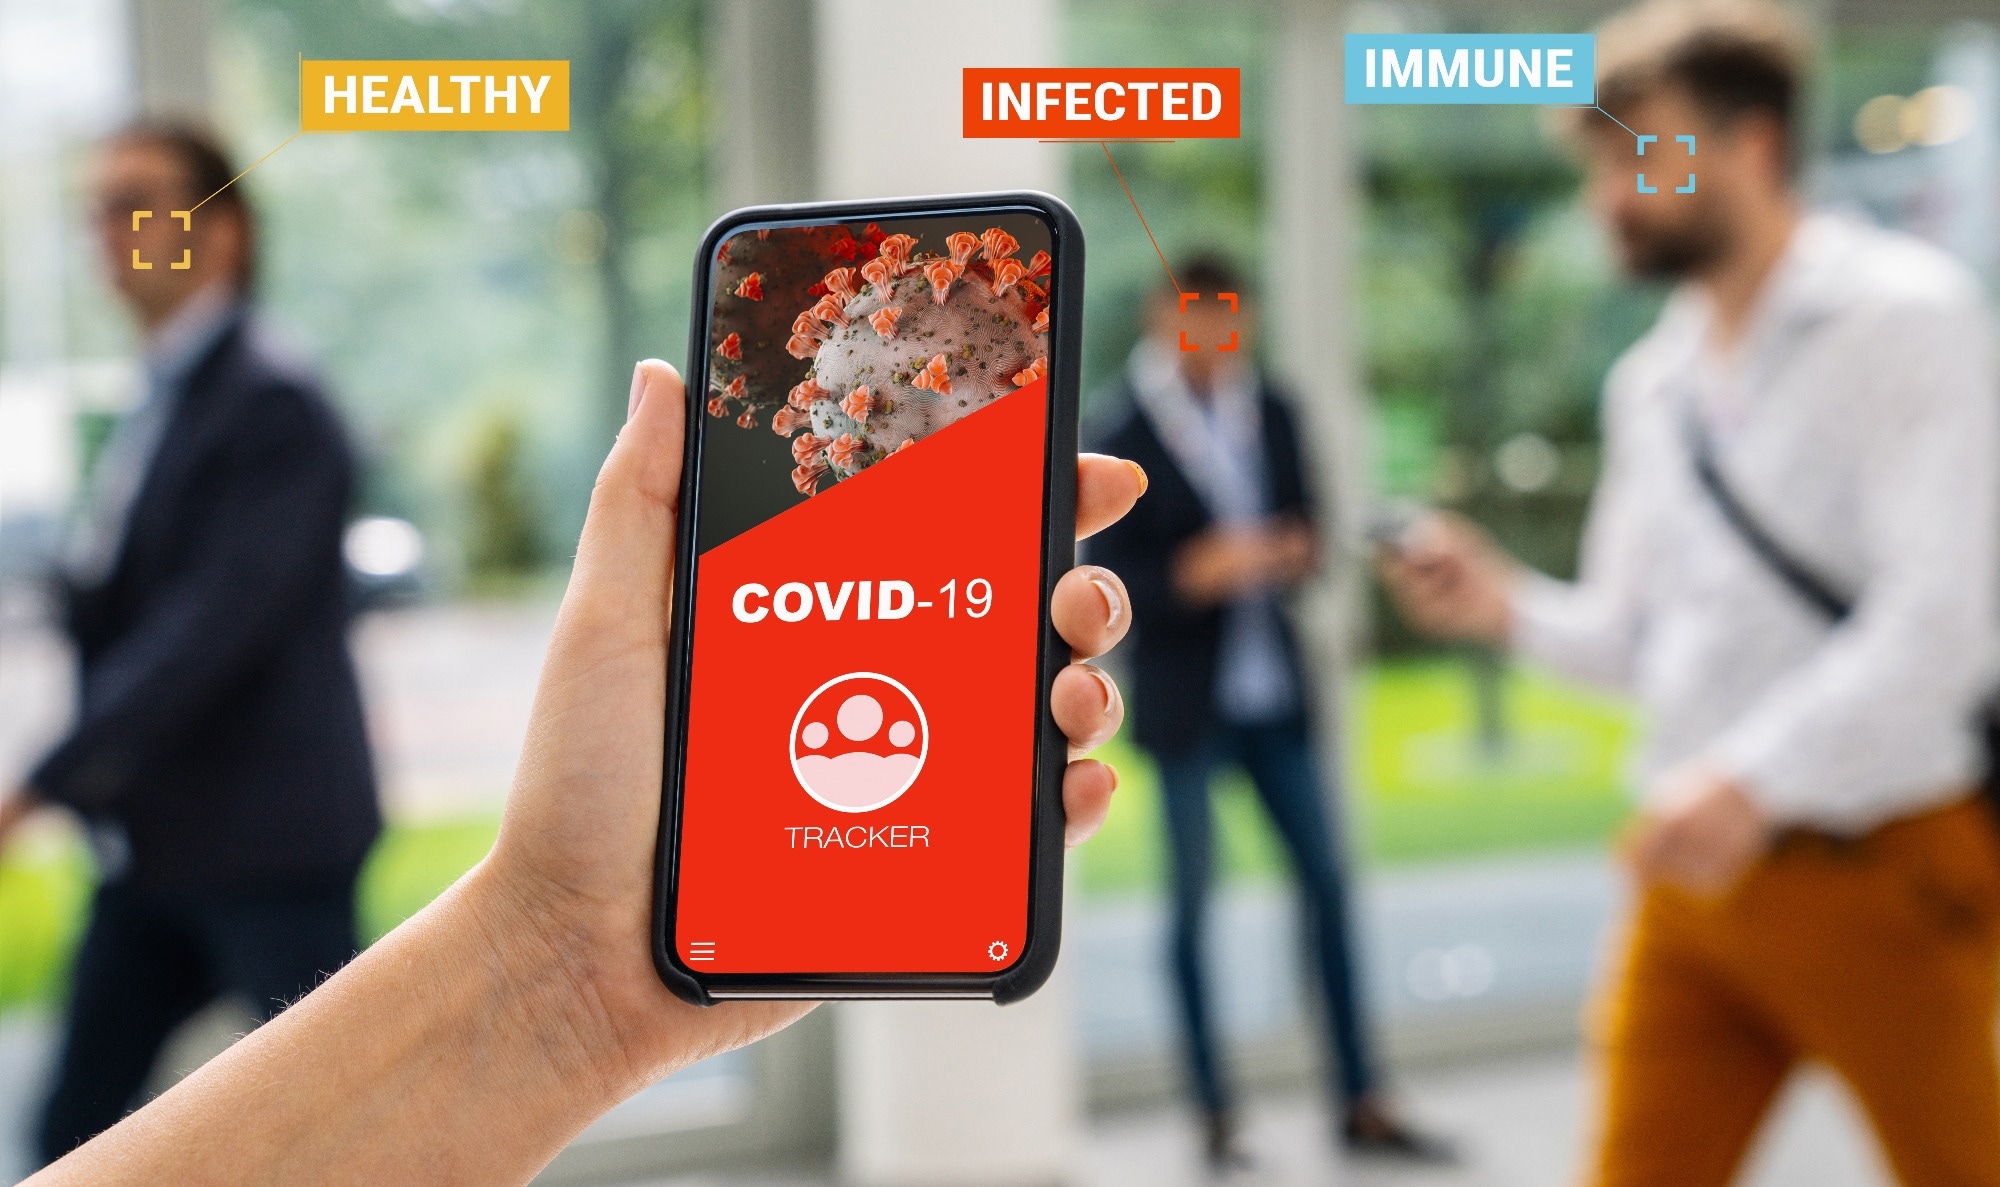 Study: Smartphone apps in the COVID-19 pandemic. Image Credit: r.classen / Shutterstock.com